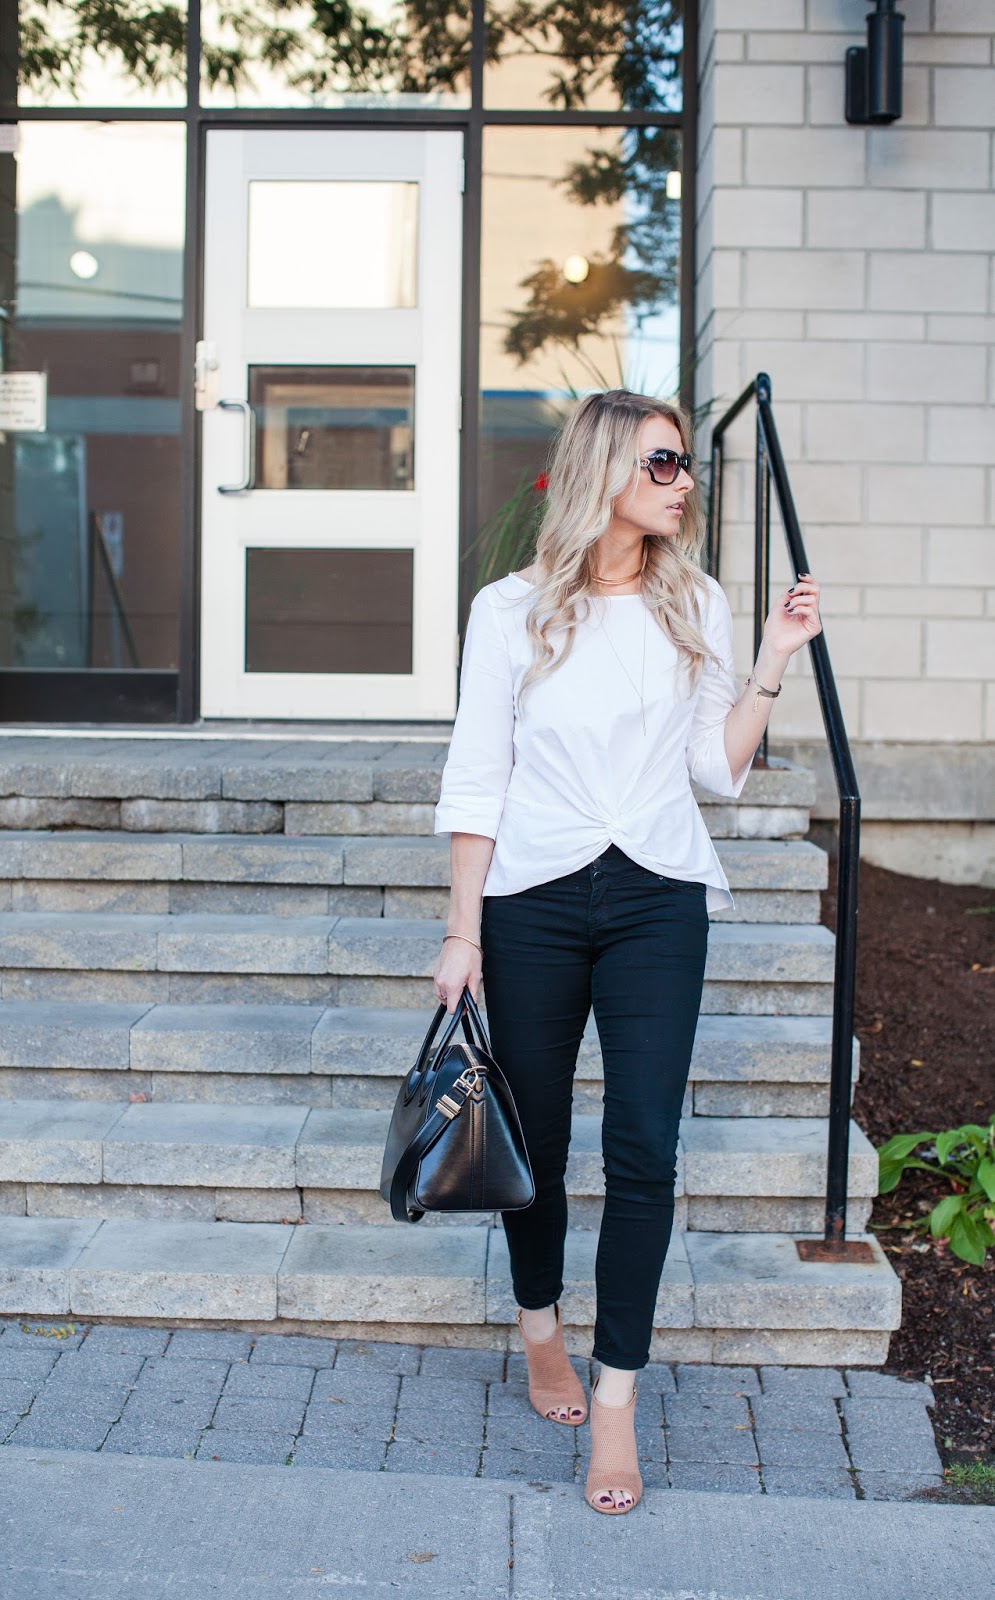 TIE FRONT BLOUSE & EASY BUSINESS CASUAL STYLE - Life with A.Co by ...